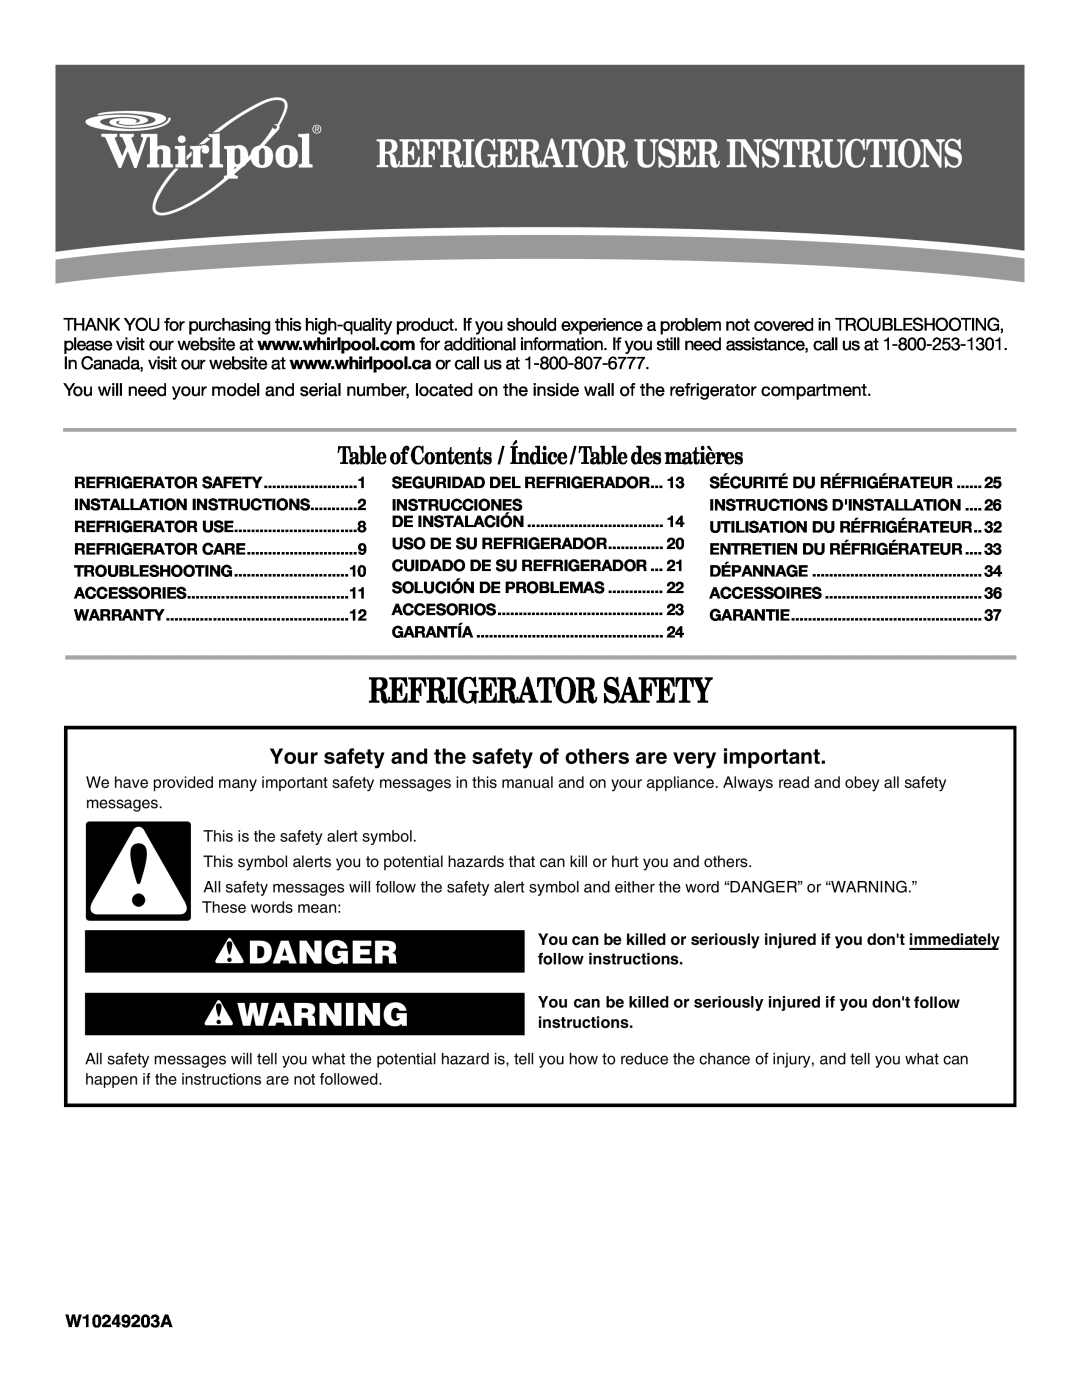 Whirlpool W10249203A installation instructions Refrigerator Safety, Danger, Table ofContents / Índice / Table des matières 